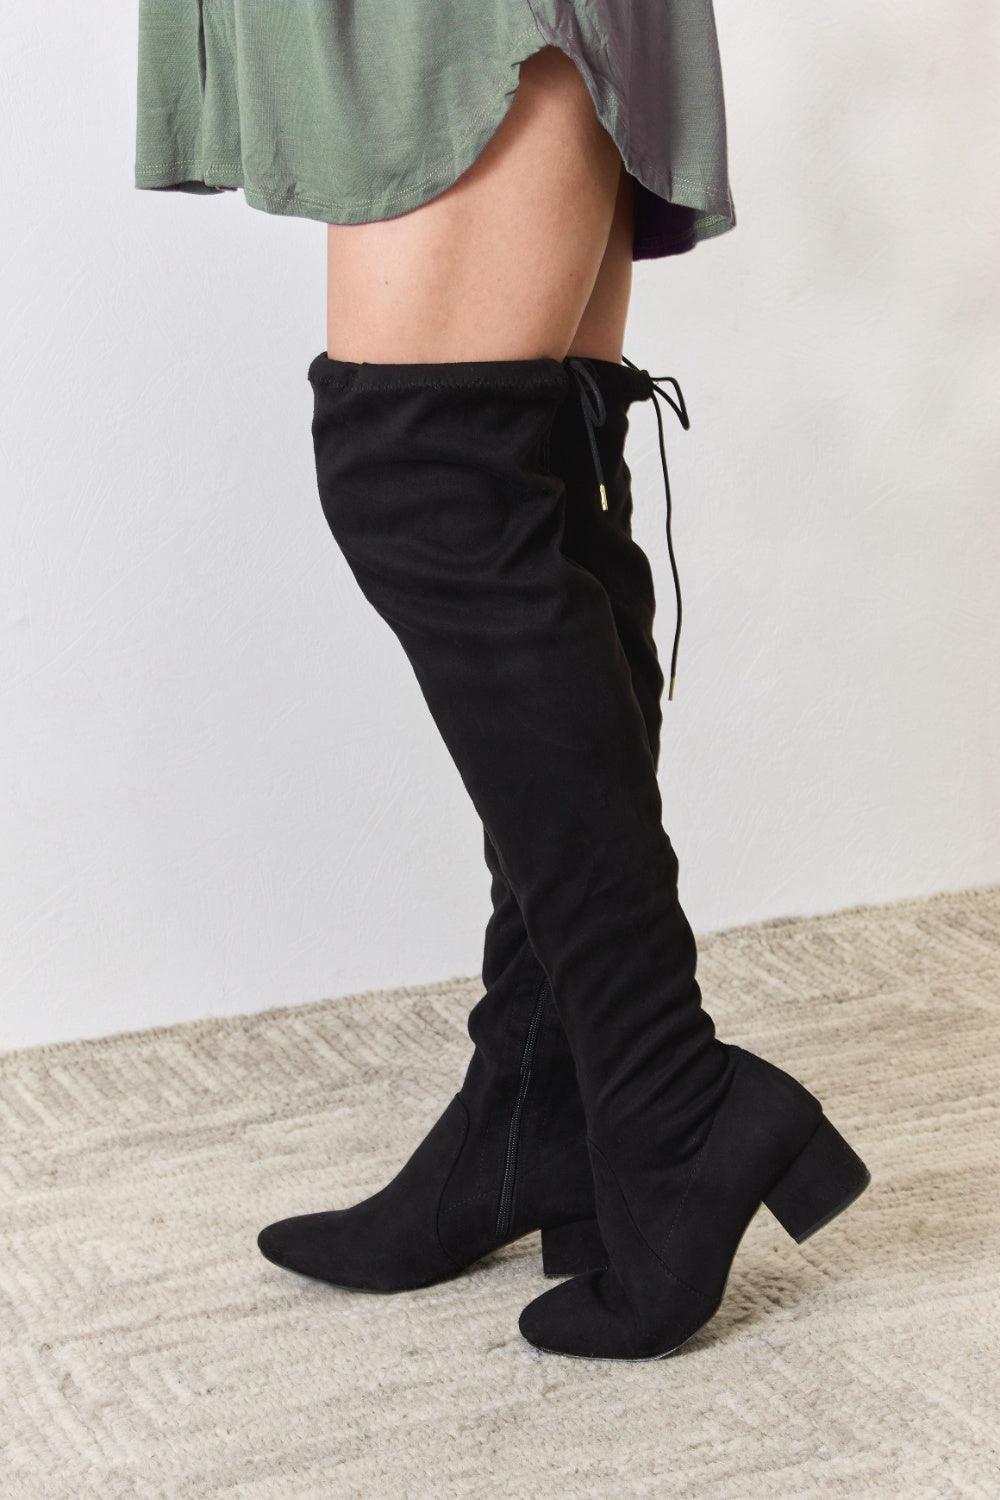 Black Faux Suede Over The Knee Boots - Inspired Eye Boutique